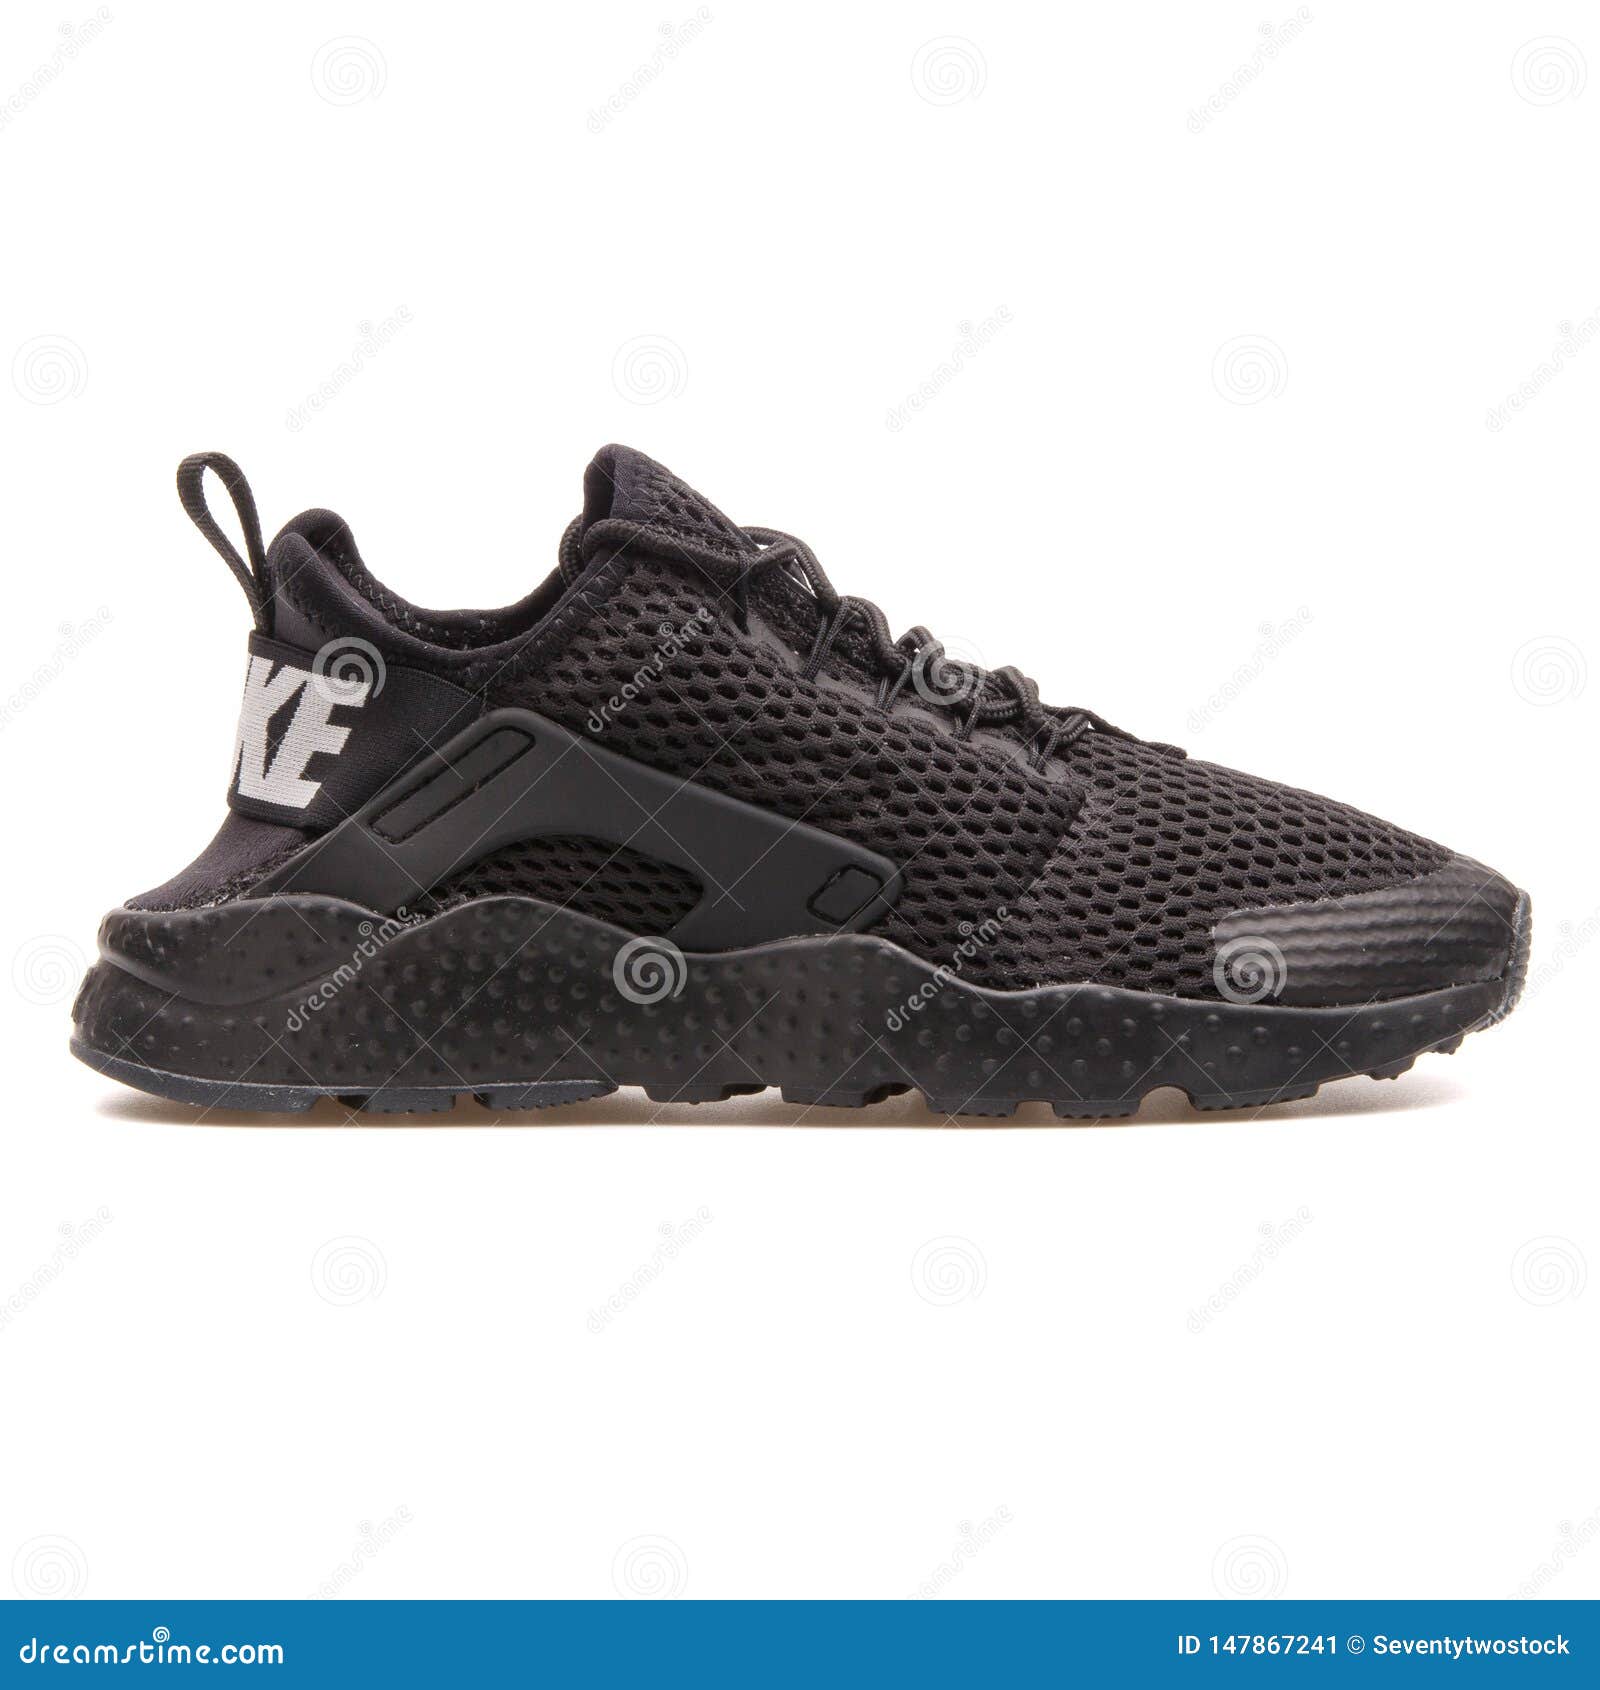 Nike Air Ultra BR Black Sneaker Photo - Image of lifestyle, colour: 147867241